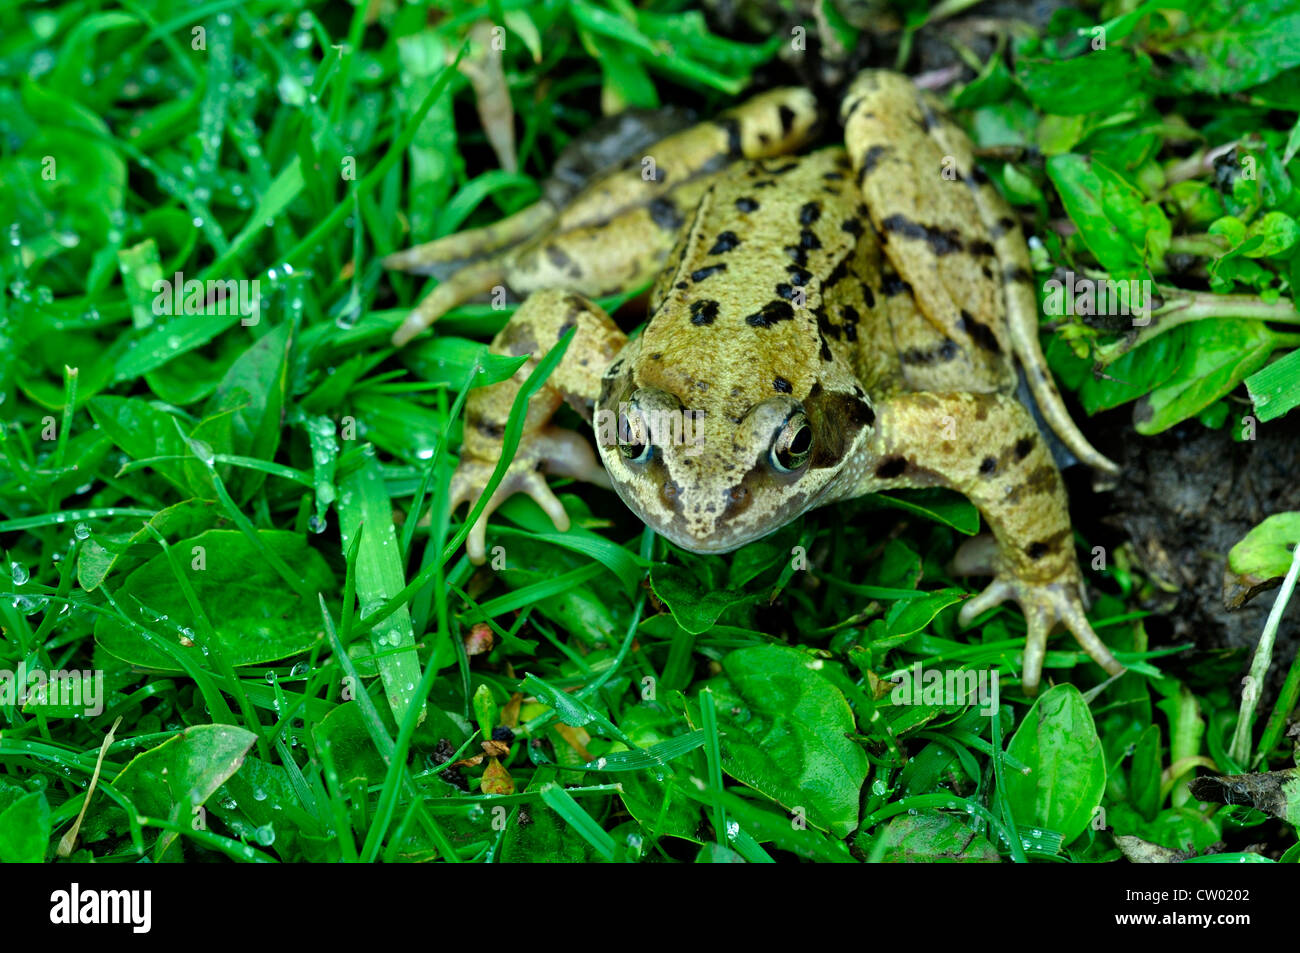 A common frog in green undergrowth UK Stock Photo